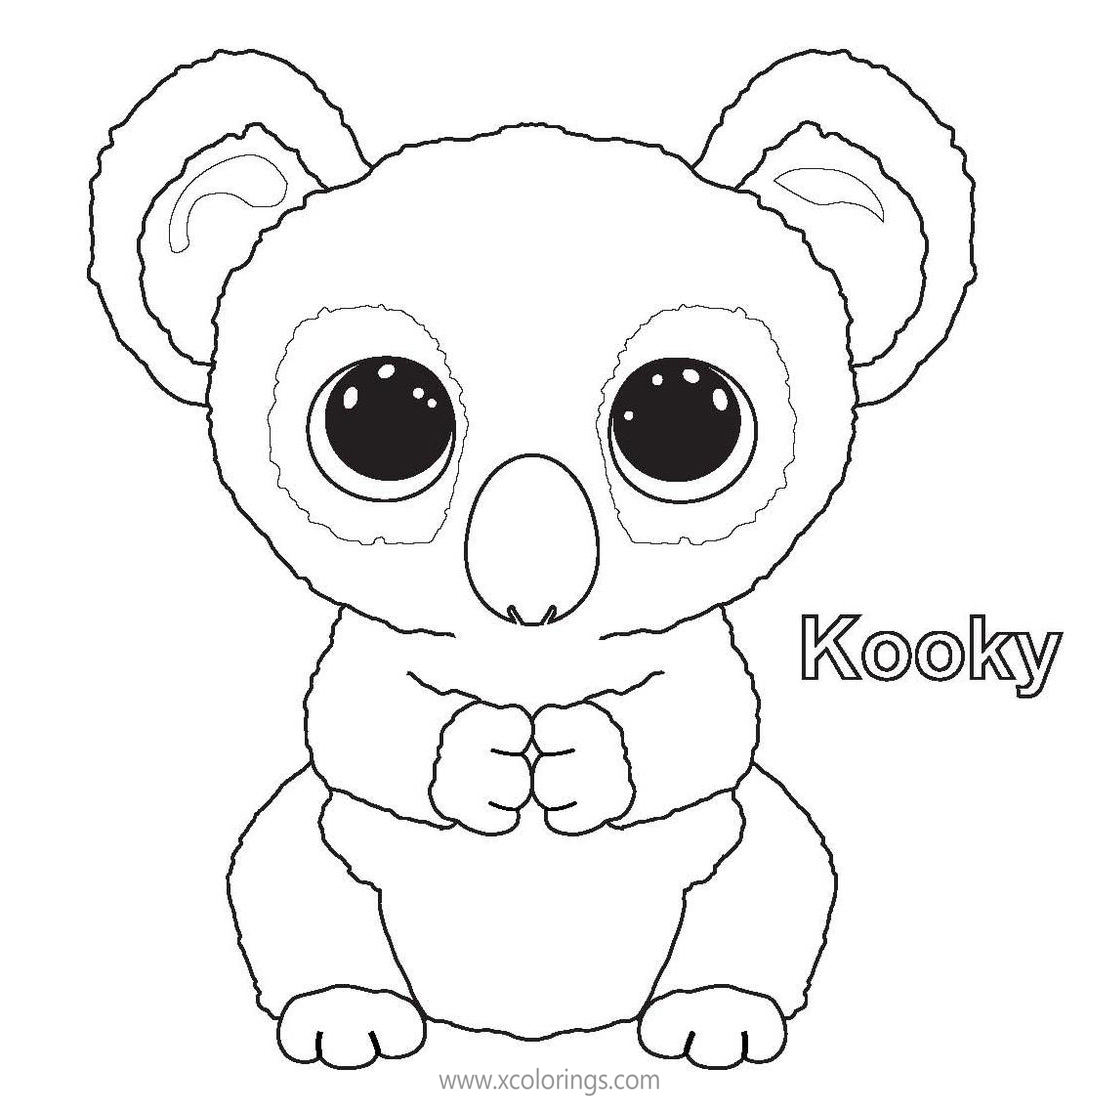 Free Beanie Boos Coloring Pages Kooky the Koala printable